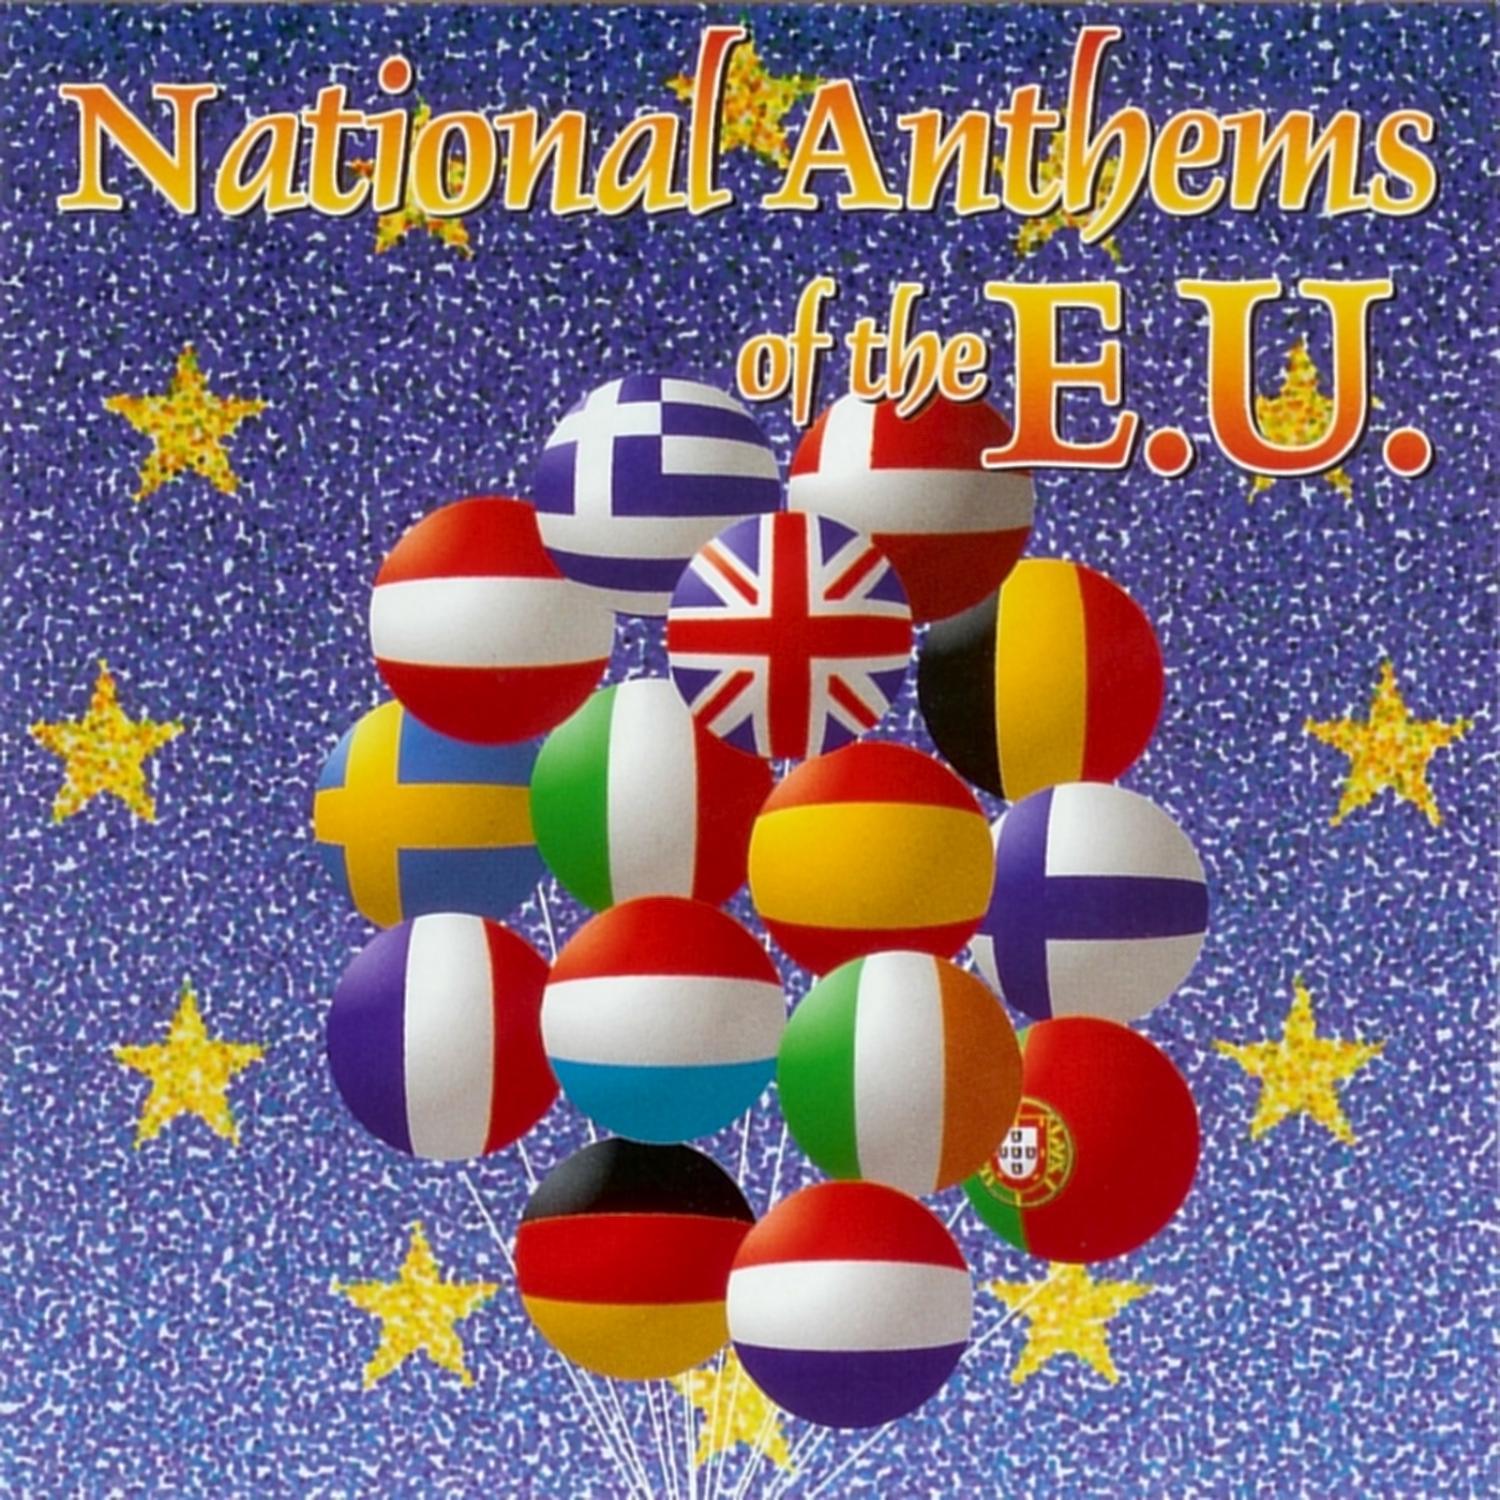 National Anthems of the E.U.